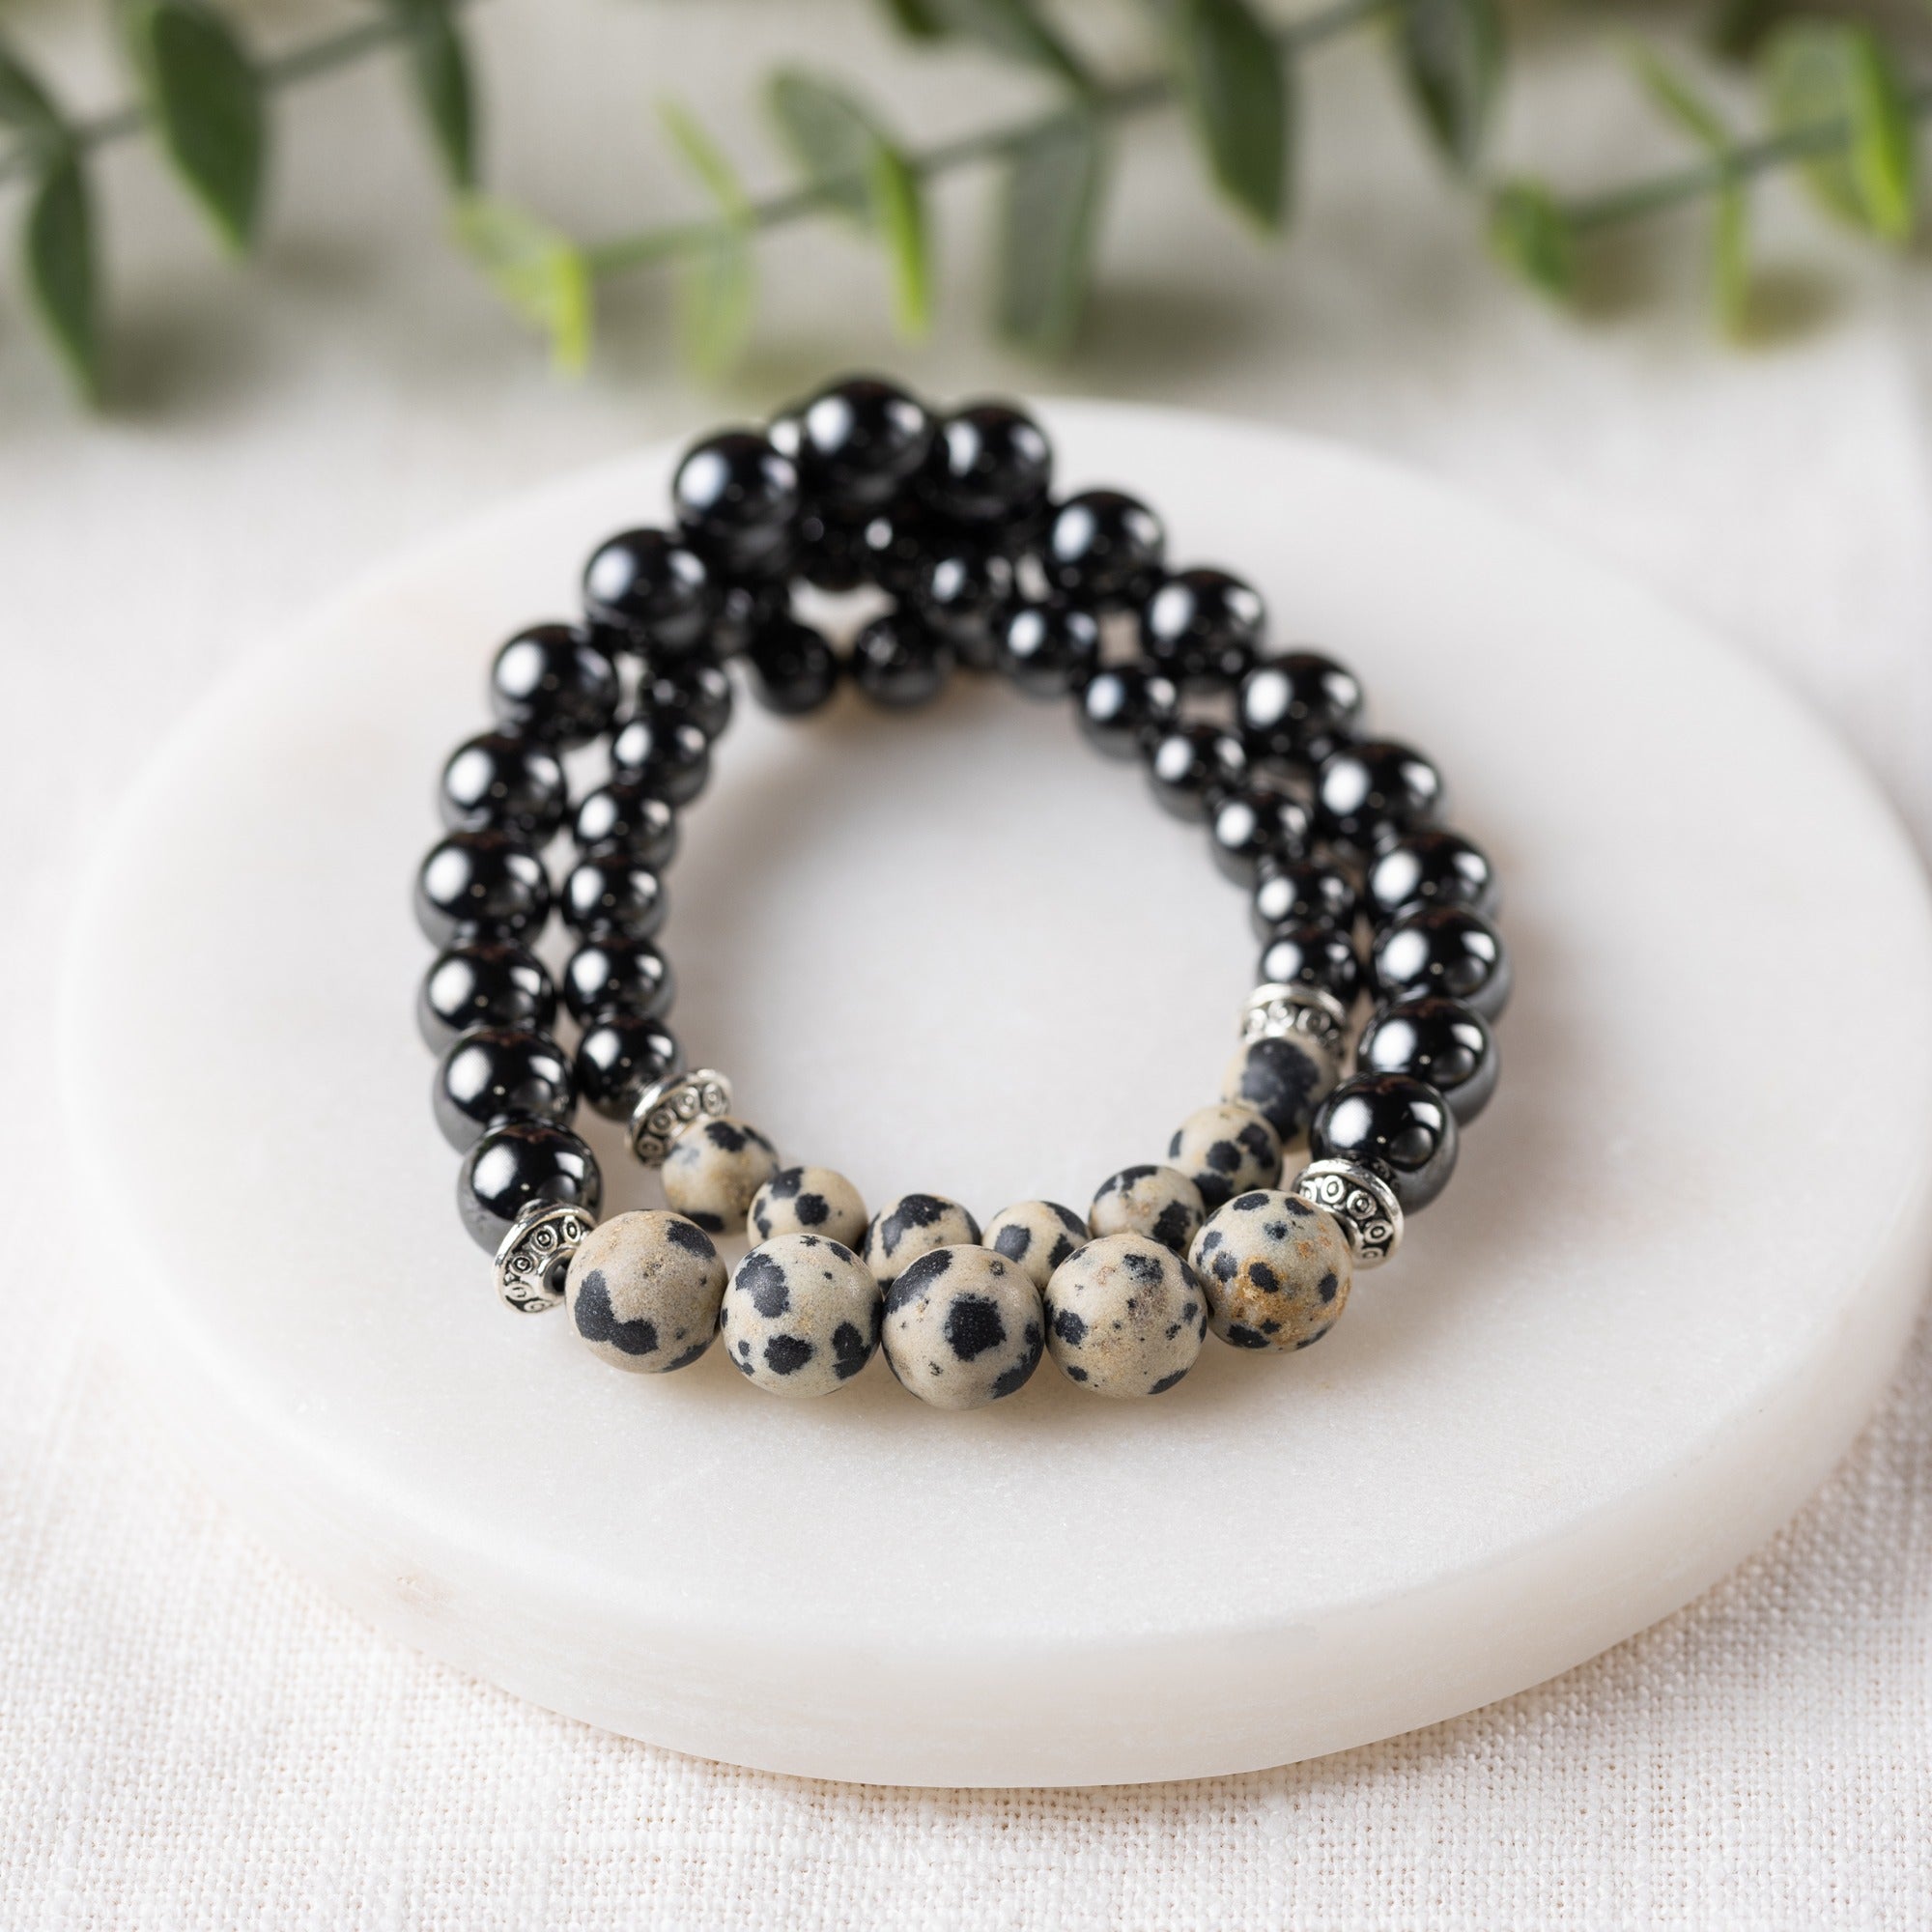 Buy Black Obsidian, tiger eye and hematite bracelet for cleansing, clarity,  strong mind, grounding and better health Online - Suspire